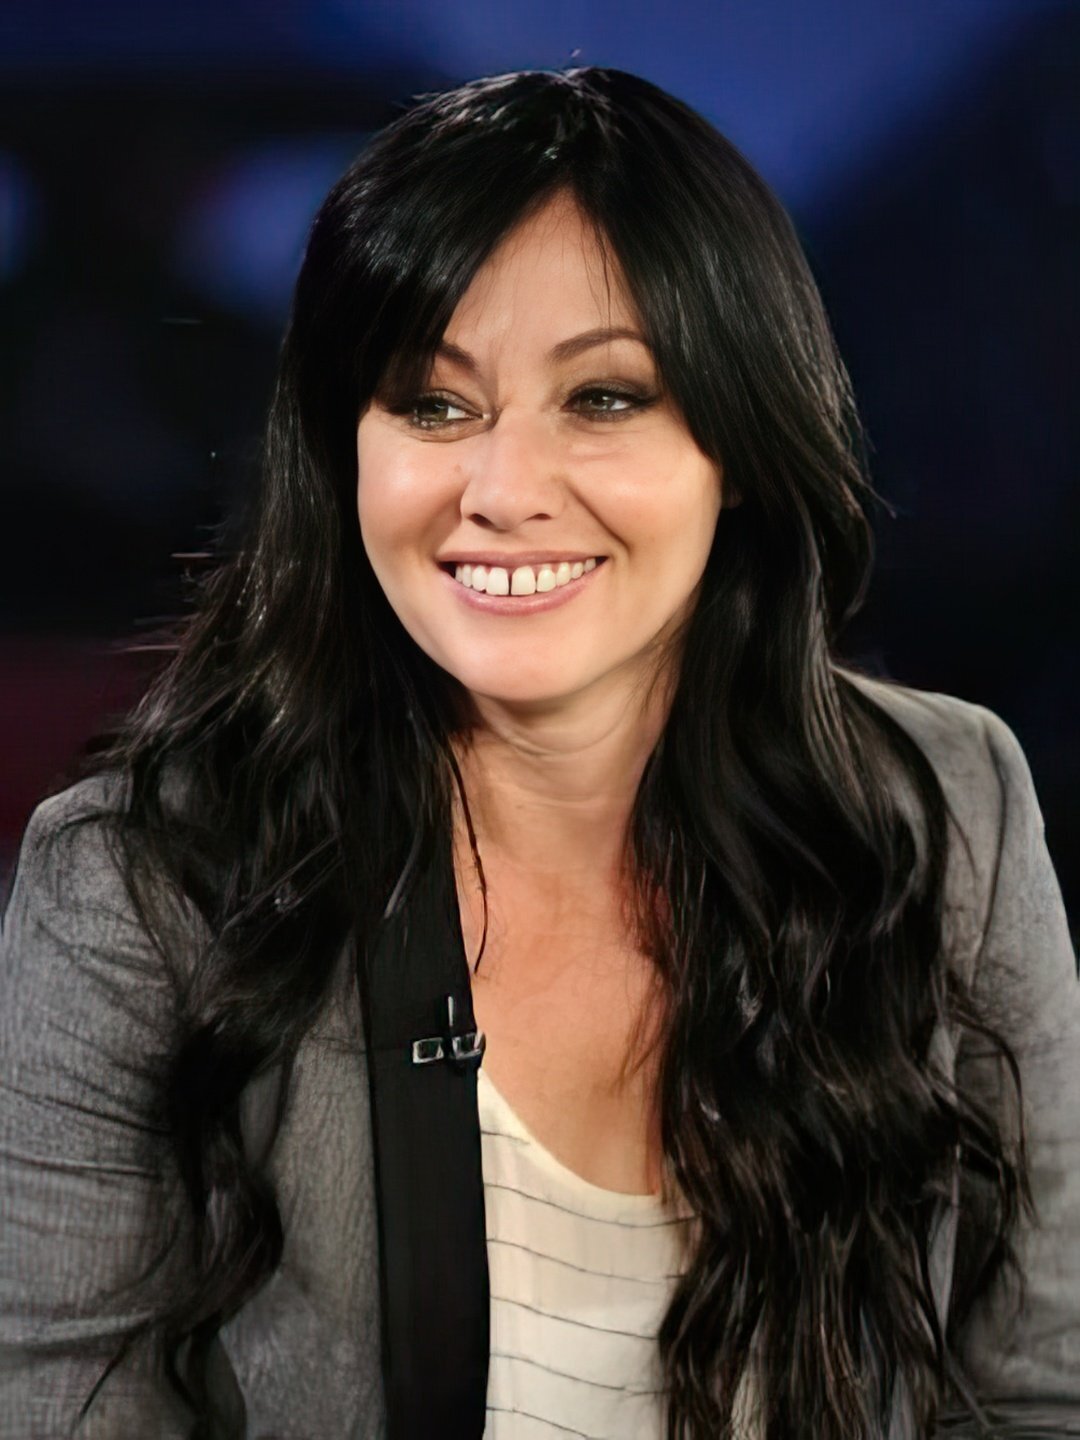 Shannen Doherty does she have kids